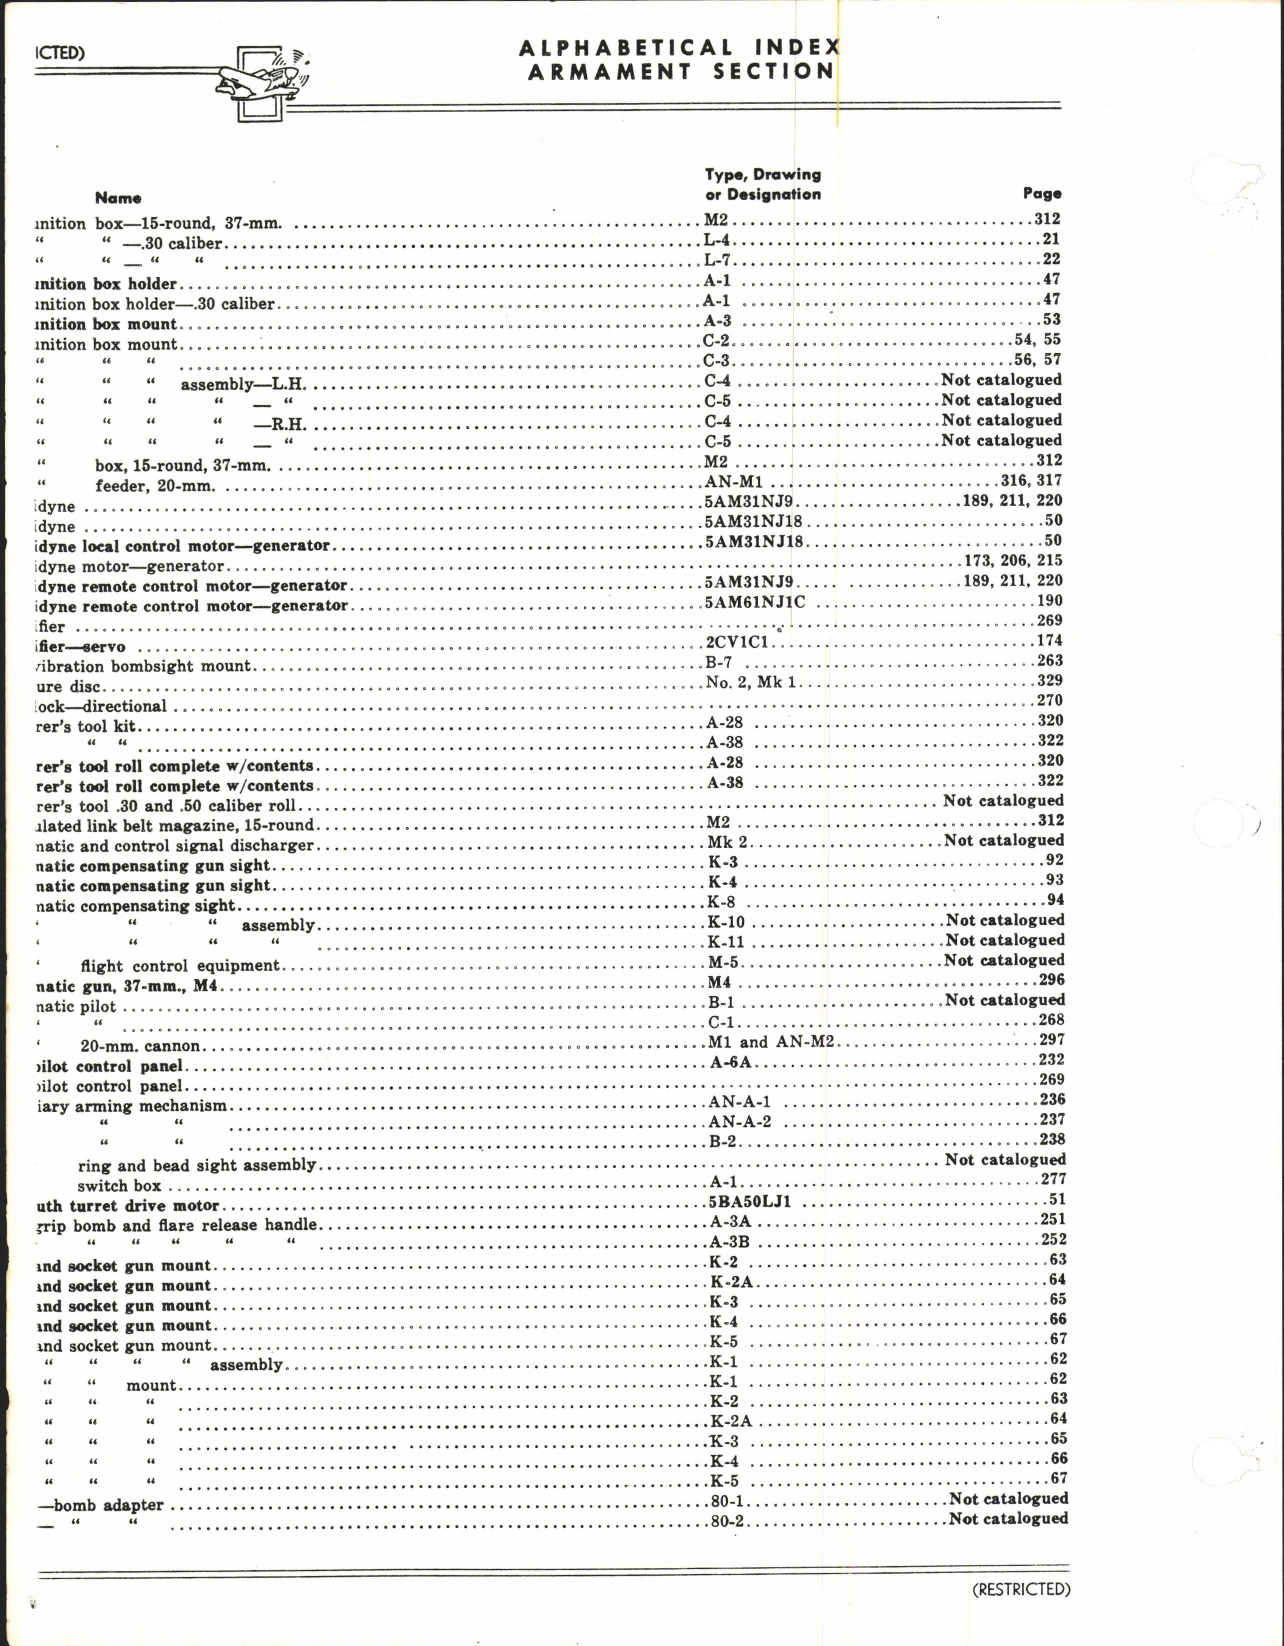 Sample page 8 from AirCorps Library document: Army-Navy Index of Aeronautical Equipment - Armament